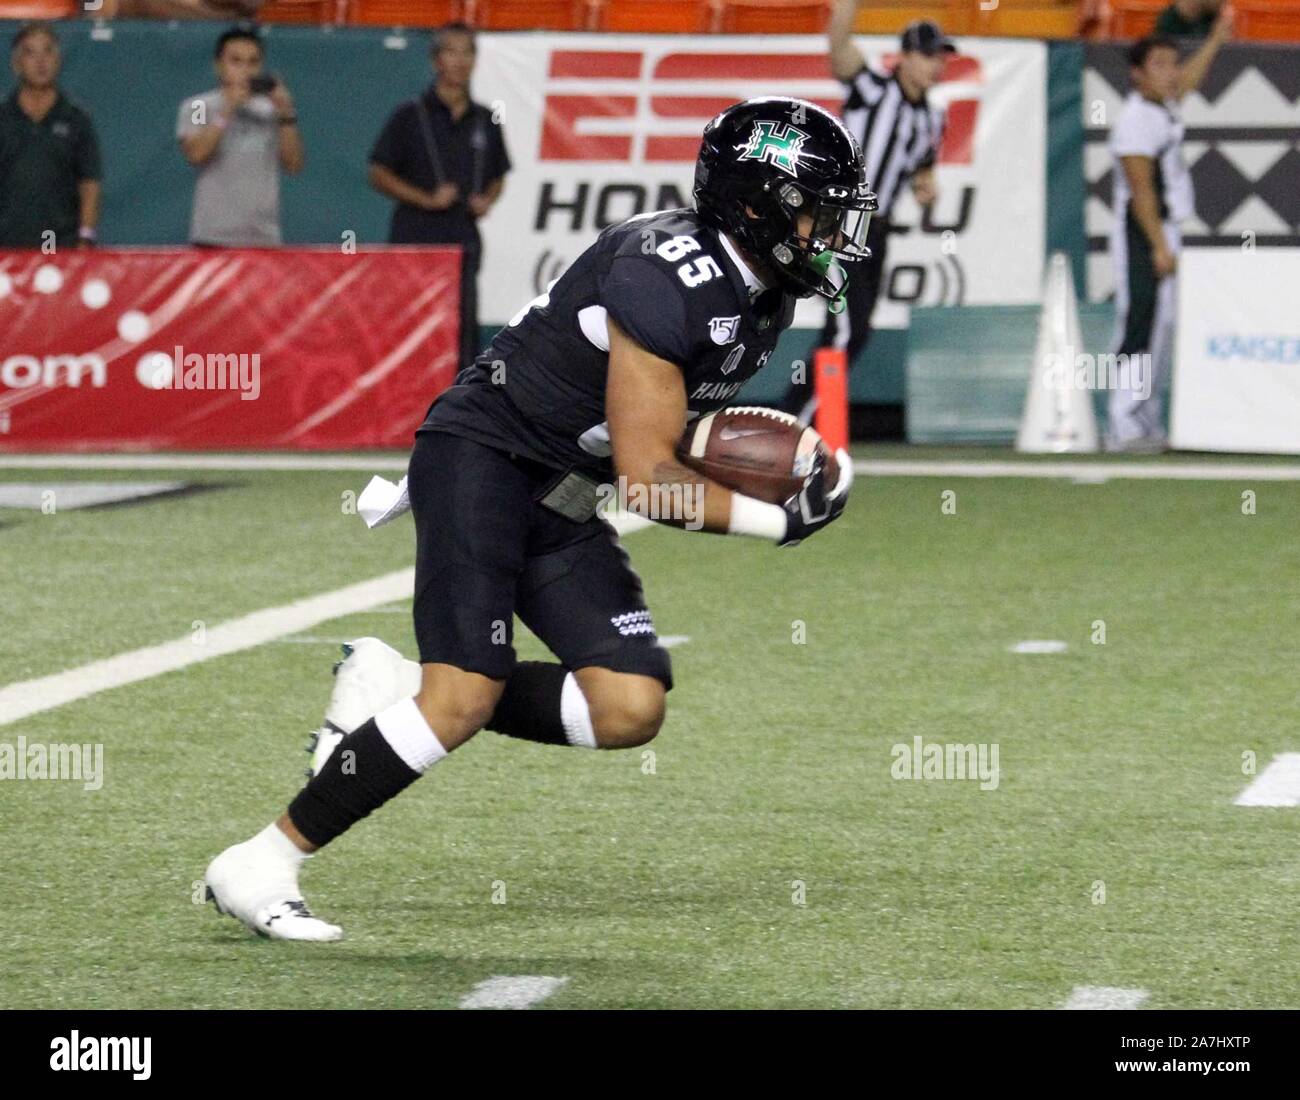 November 2, 2019 - Hawaii Rainbow Warriors wide receiver Lincoln Victor #85 returns a kickoff during a game between the Fresno State Bulldogs and the Hawaii Rainbow Warriors at Aloha Stadium in Honolulu, HI - Michael Sullivan/CSM. Stock Photo